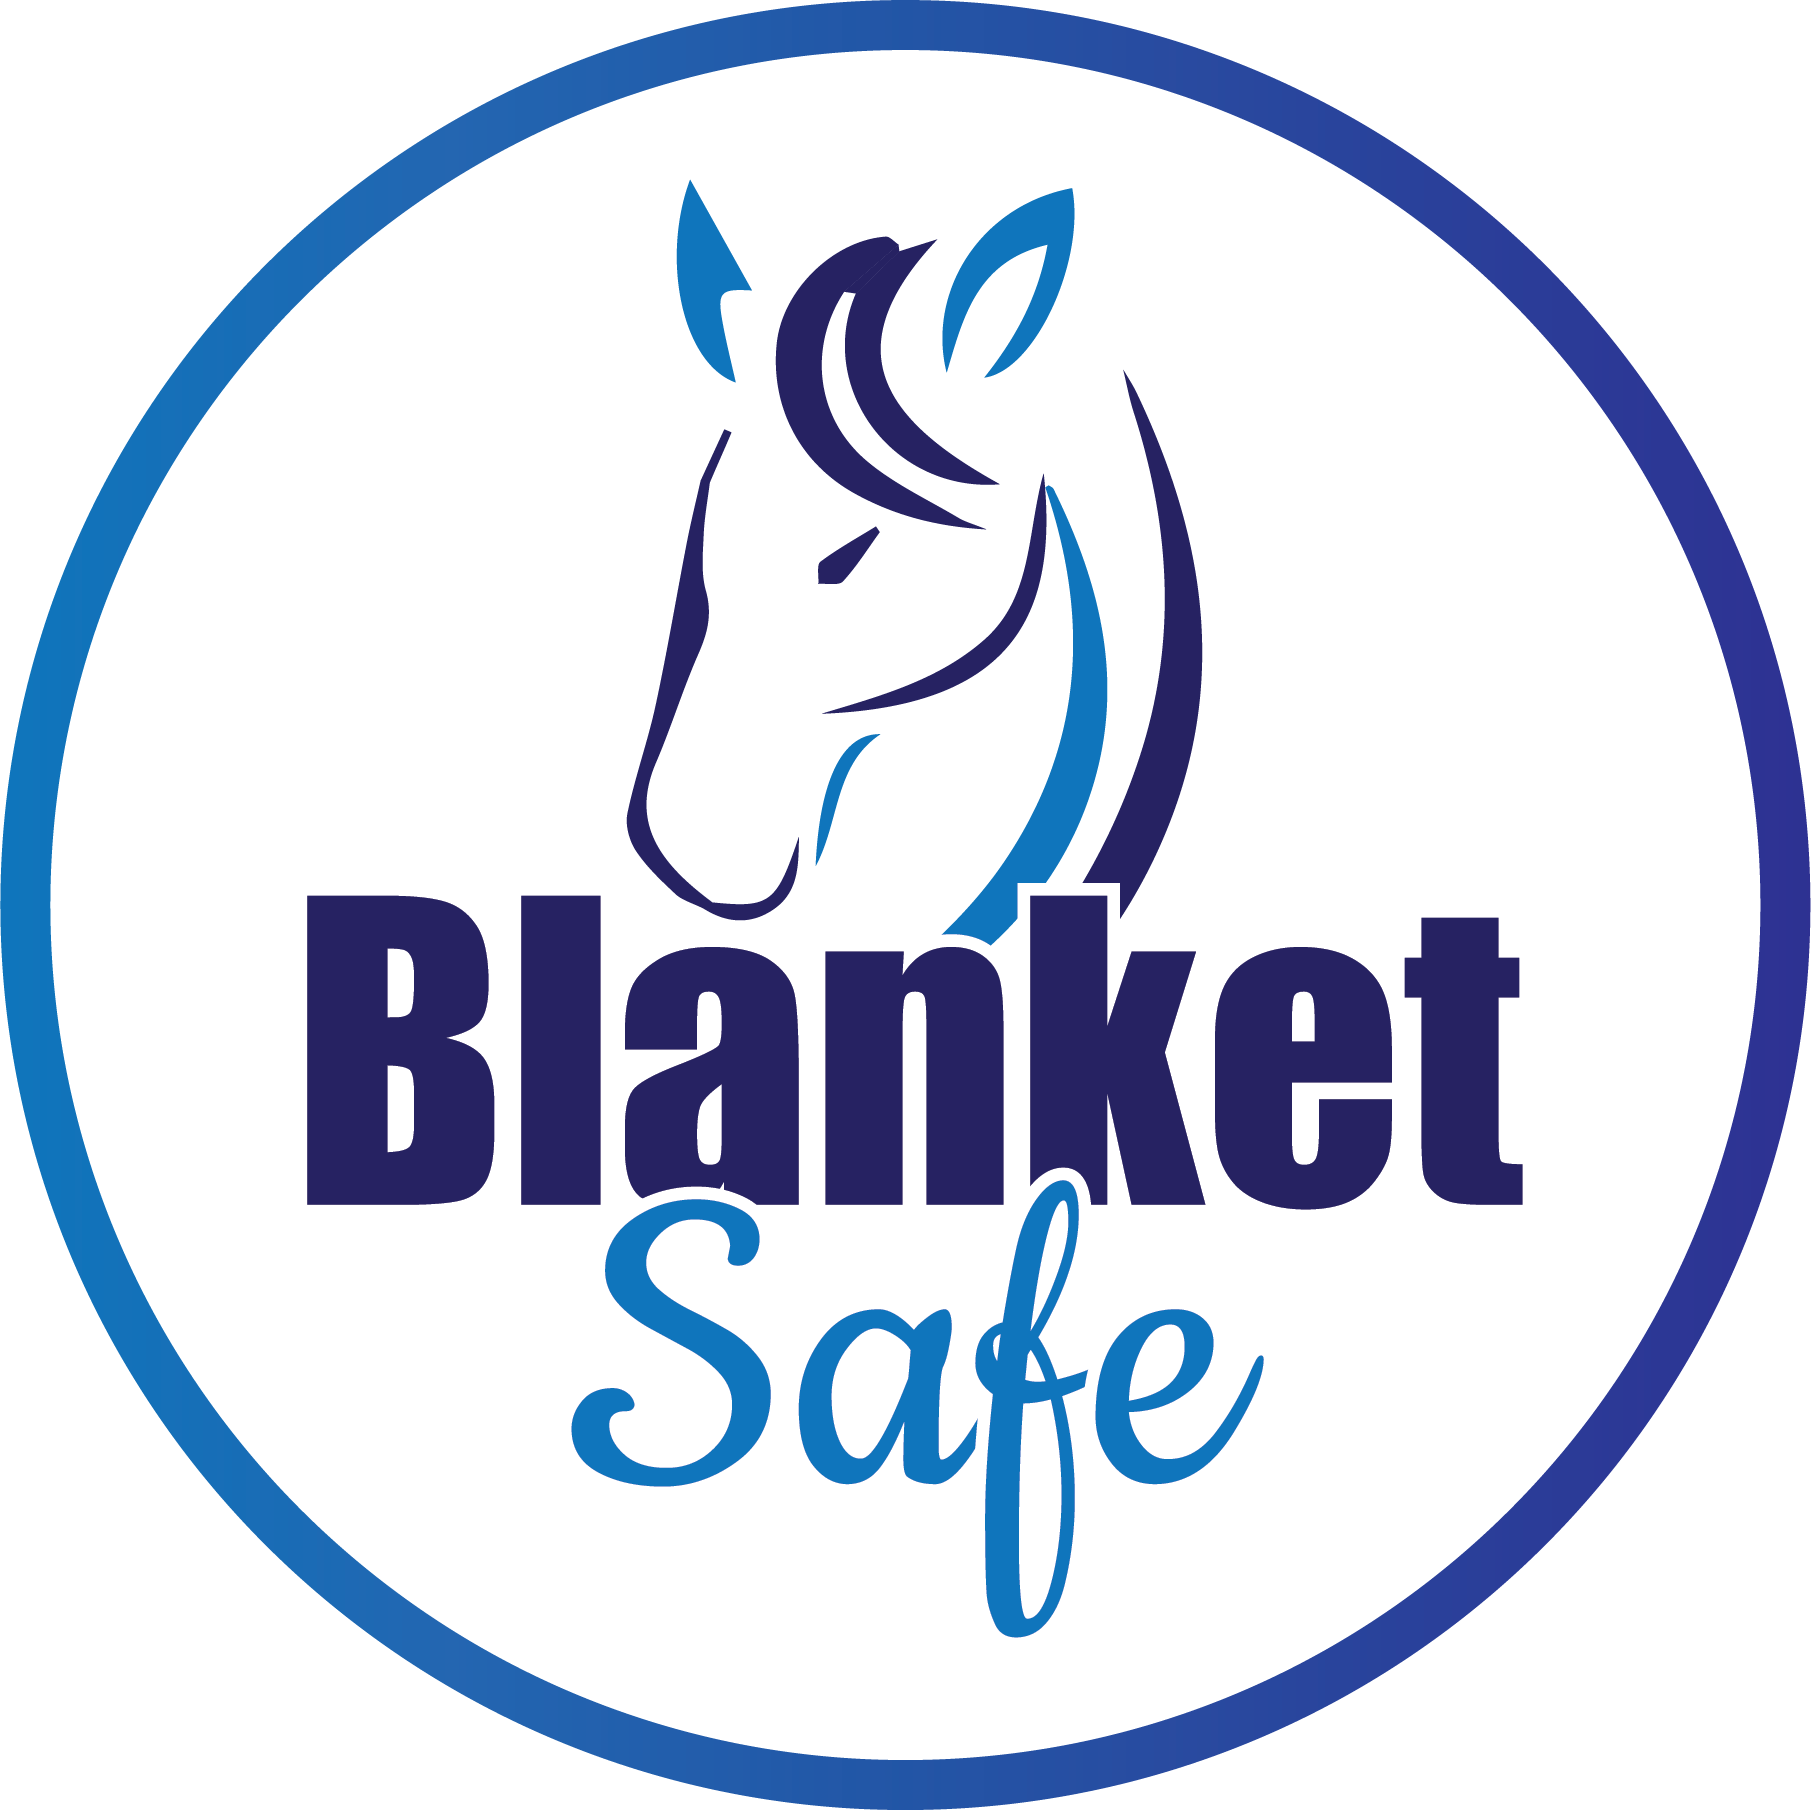 Providing Equestrians and Animal lovers with a laundry soap for their pet/horse wear. Free from Detergents and Harsh chemicals. Safe for sensitive skin & fabric